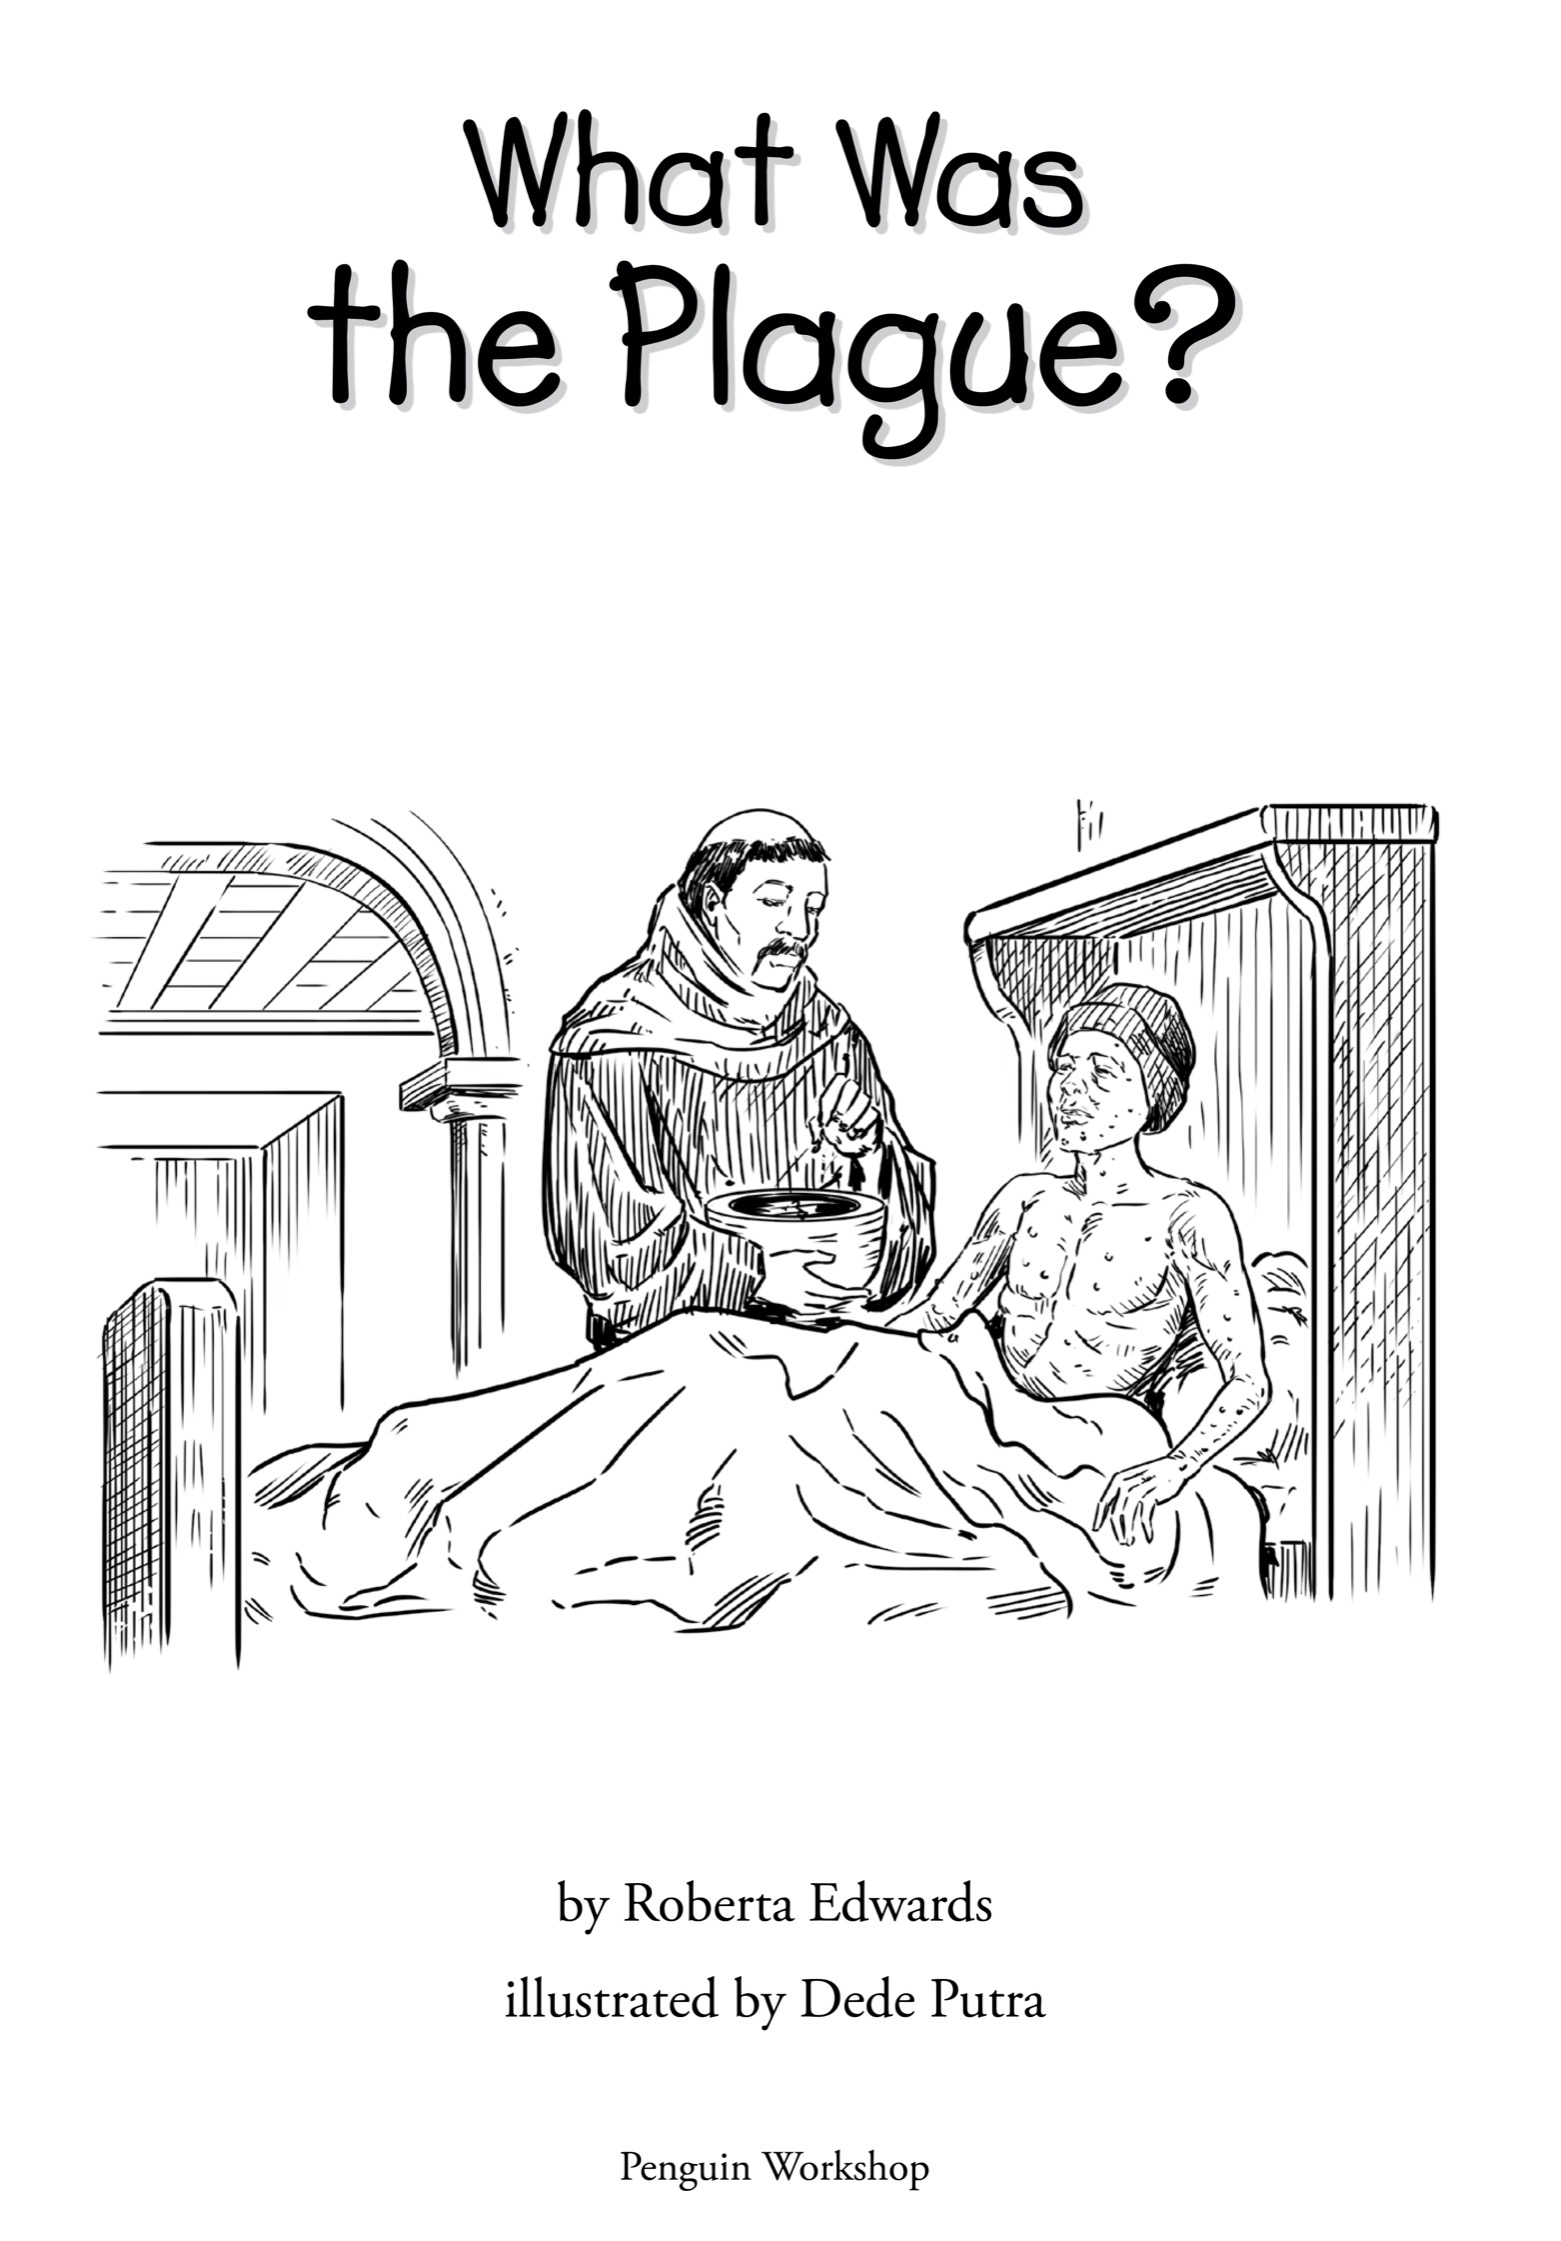 Book Title, What Was the Plague?, Author, Roberta Edwards; illustrated by Dede Putra, Imprint, Penguin Workshop